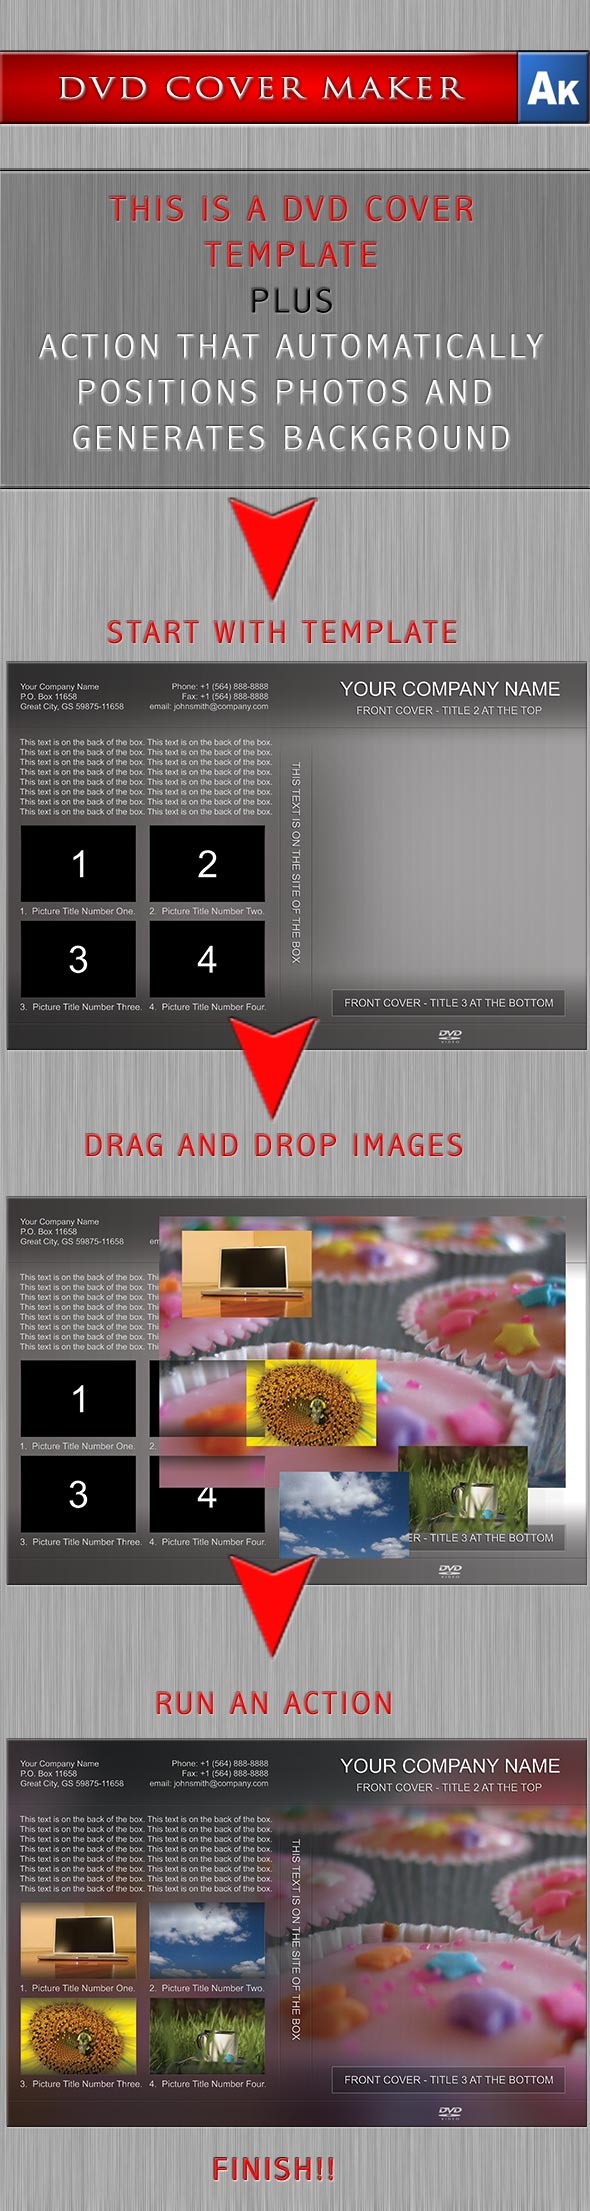 DVD Cover Maker with Photoshop Action